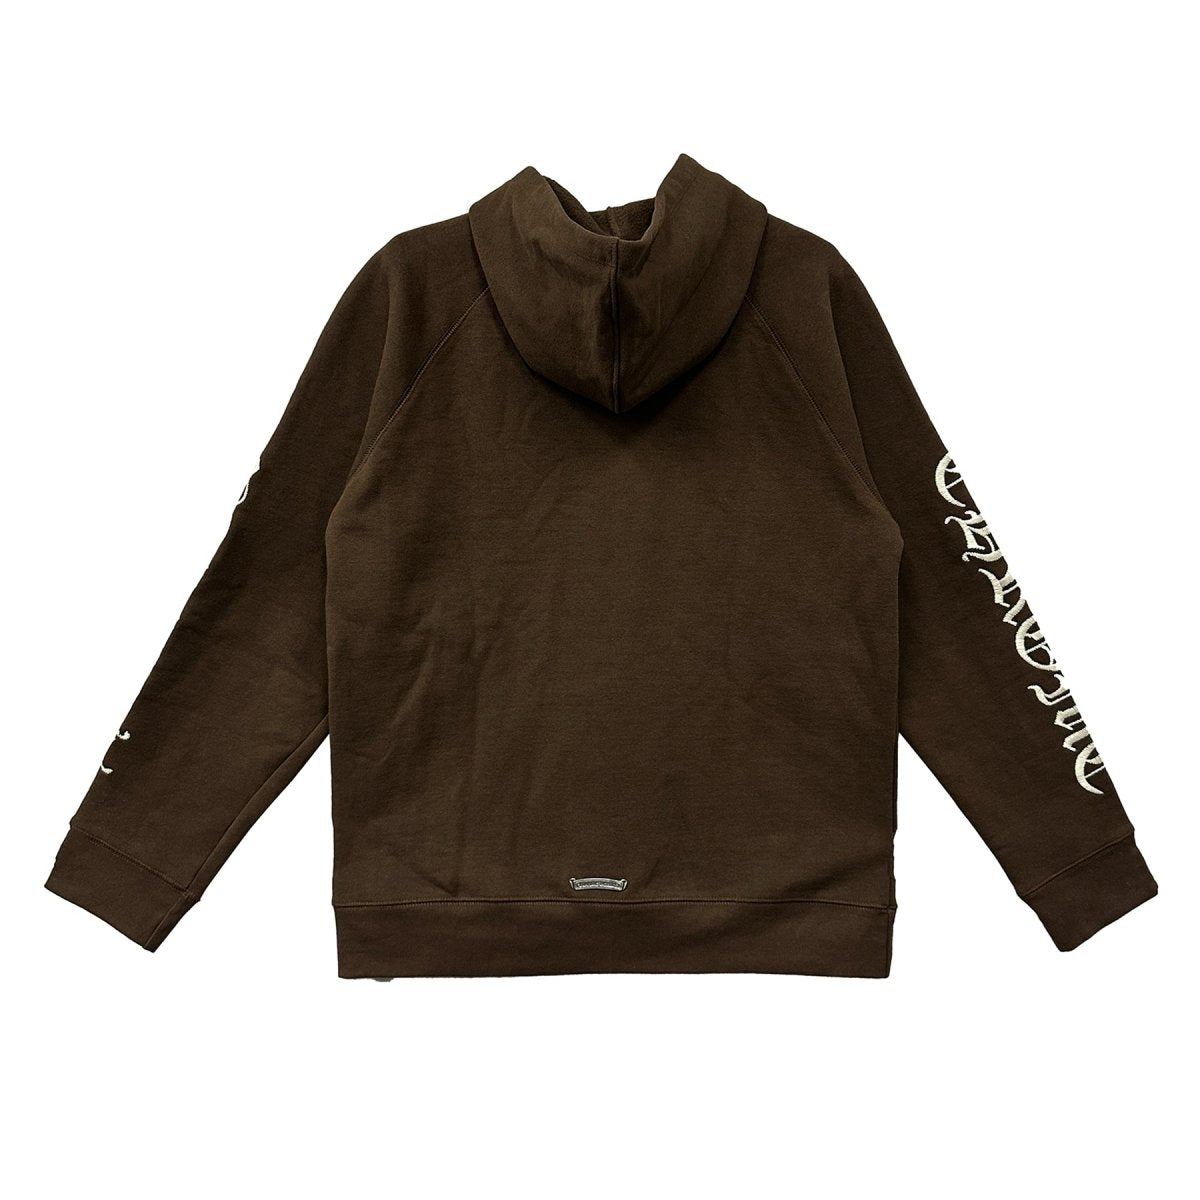 Chrome Hearts Embroidered Brown CH Hoodie - SHENGLI ROAD MARKET